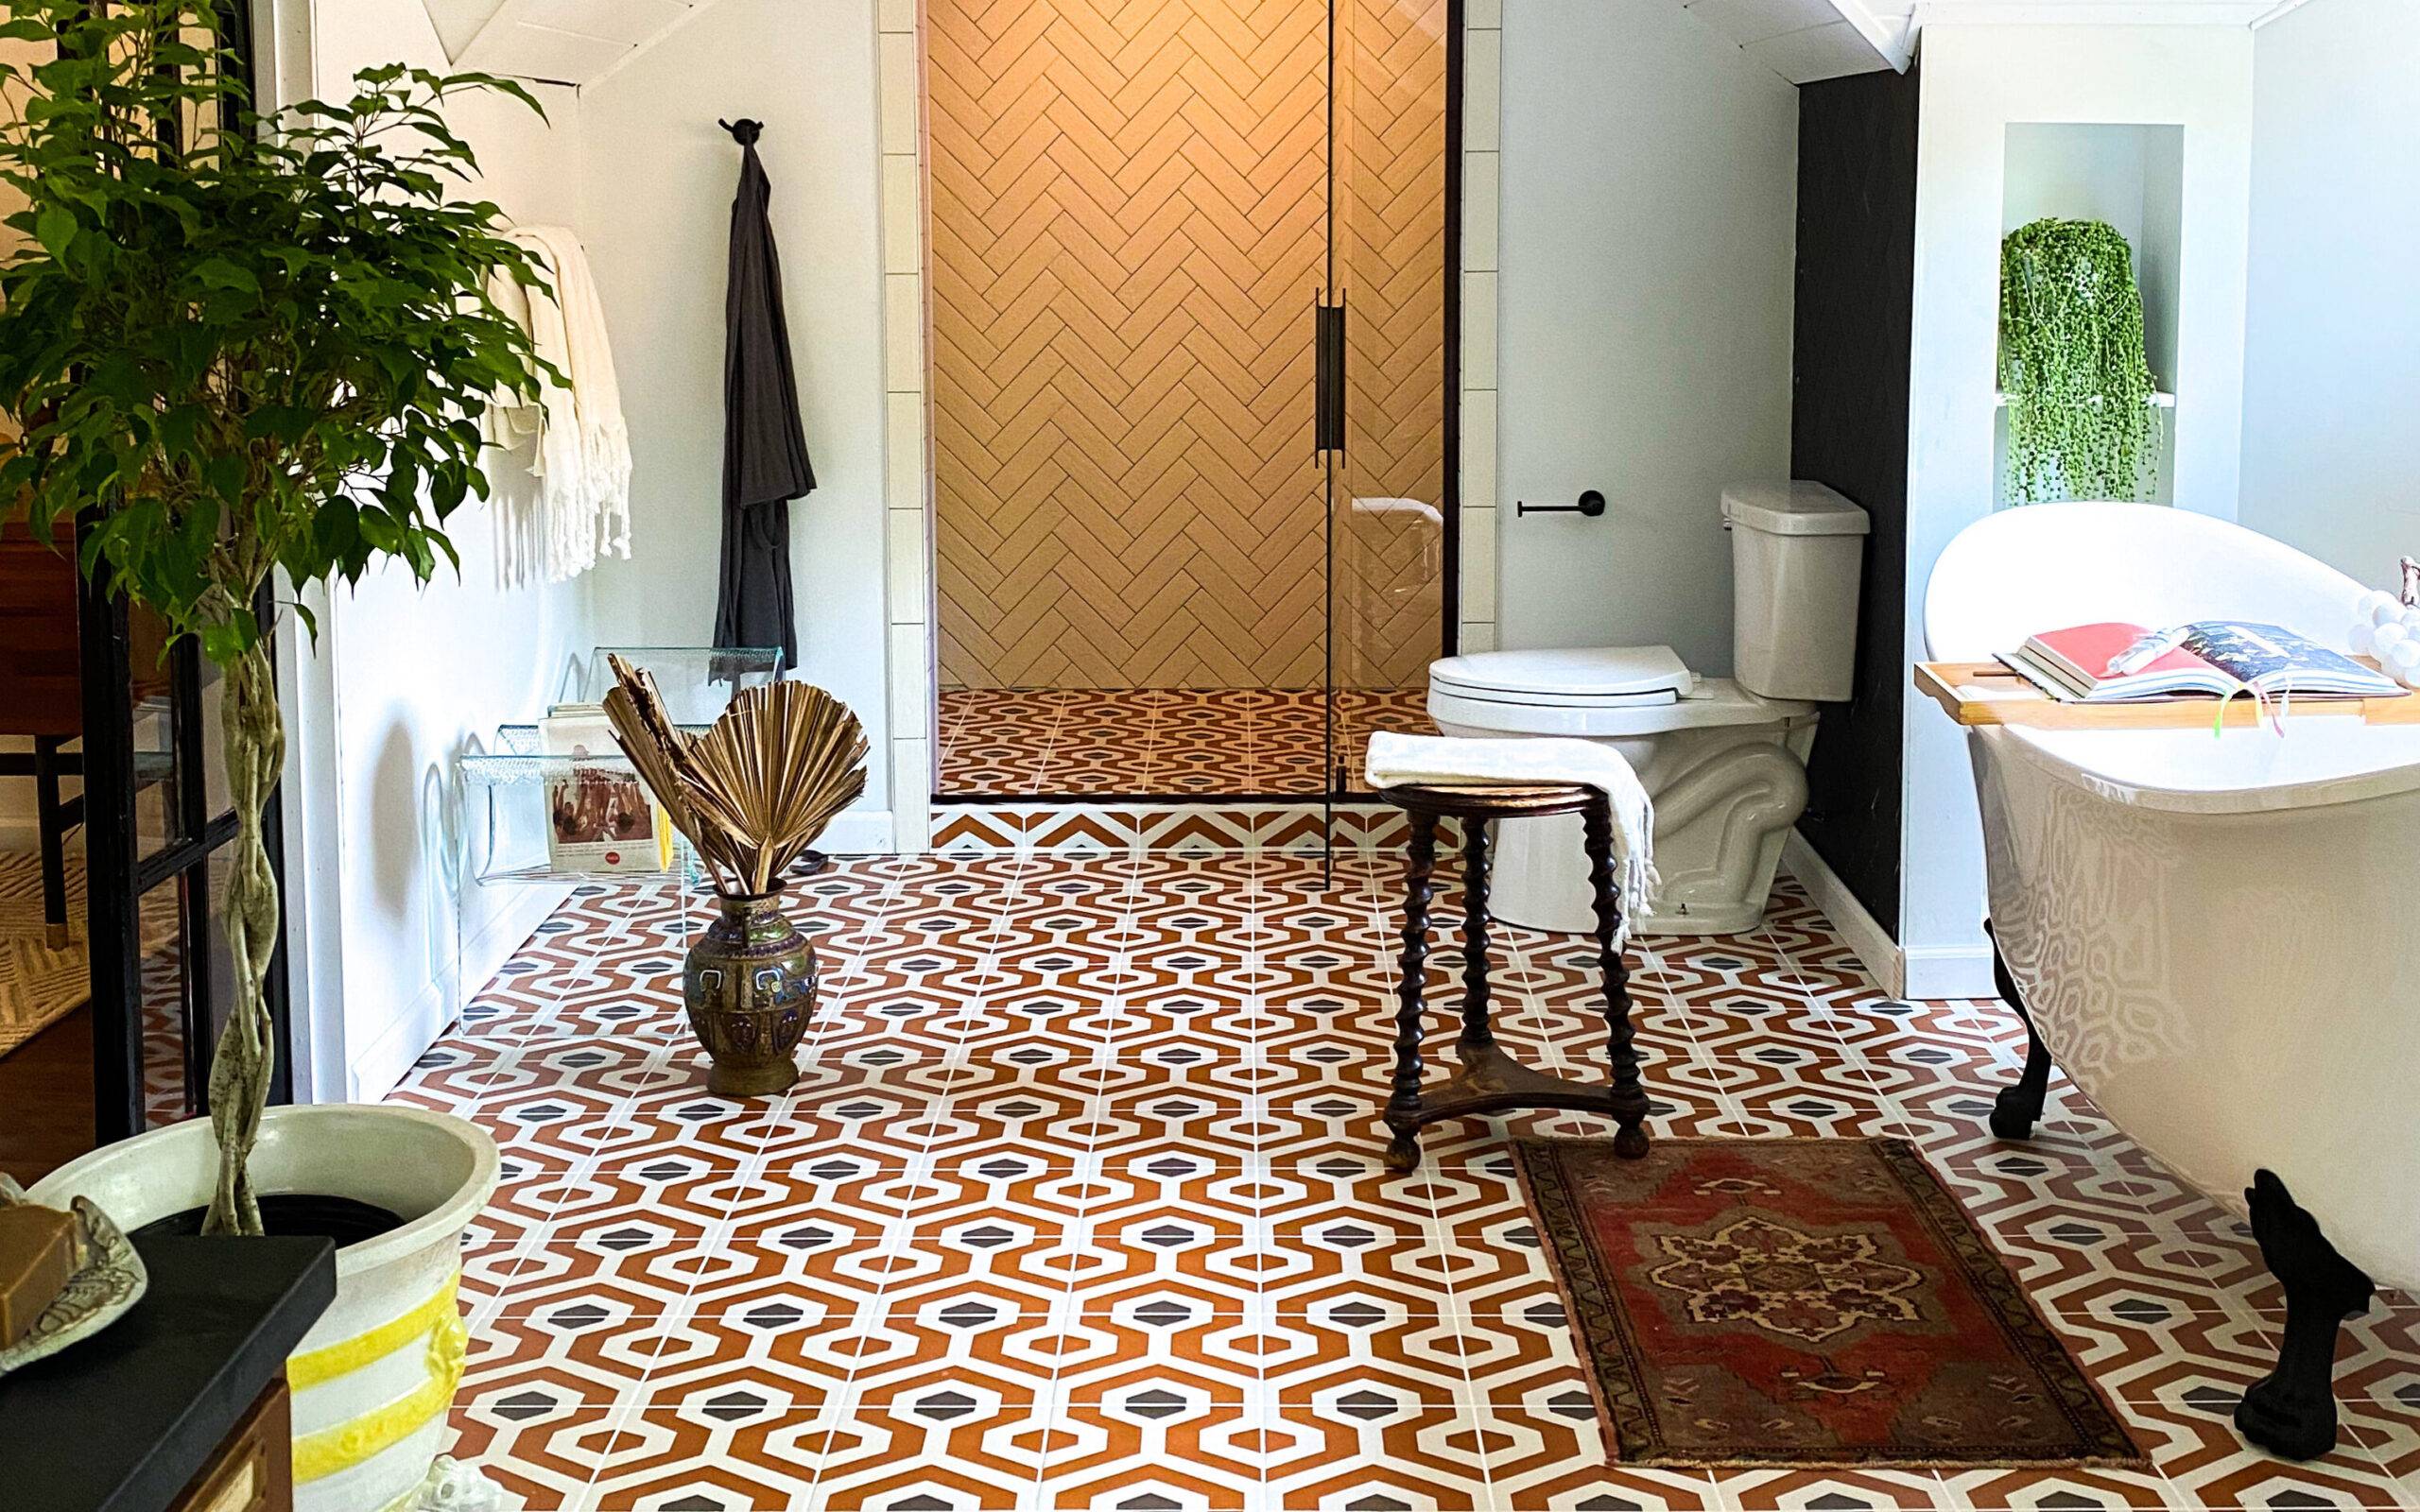 Bathroom with black, orange and off-white geometric patterned tile floor. 